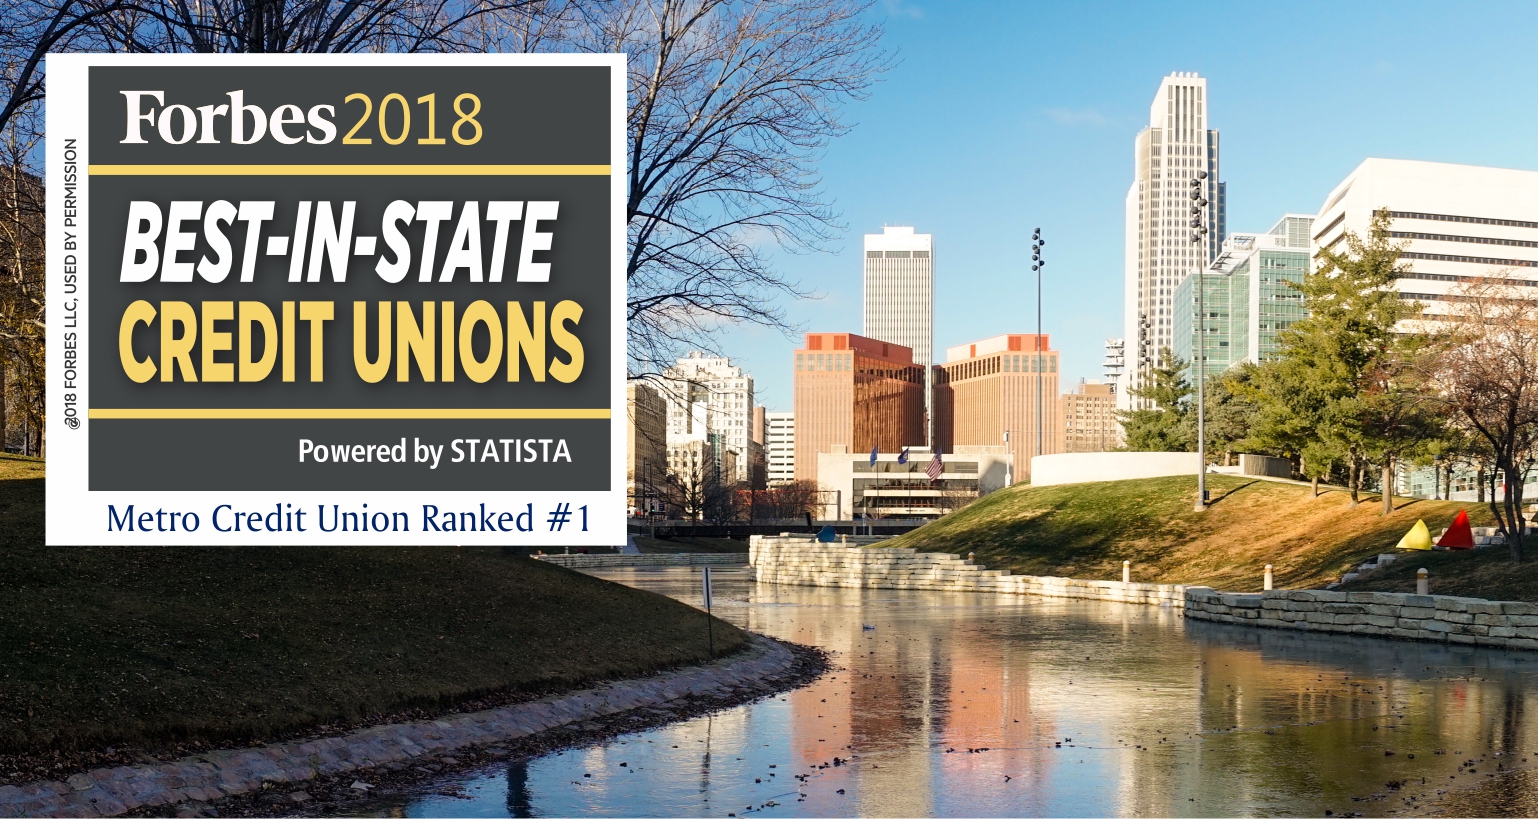 Forbes best in state credit unions